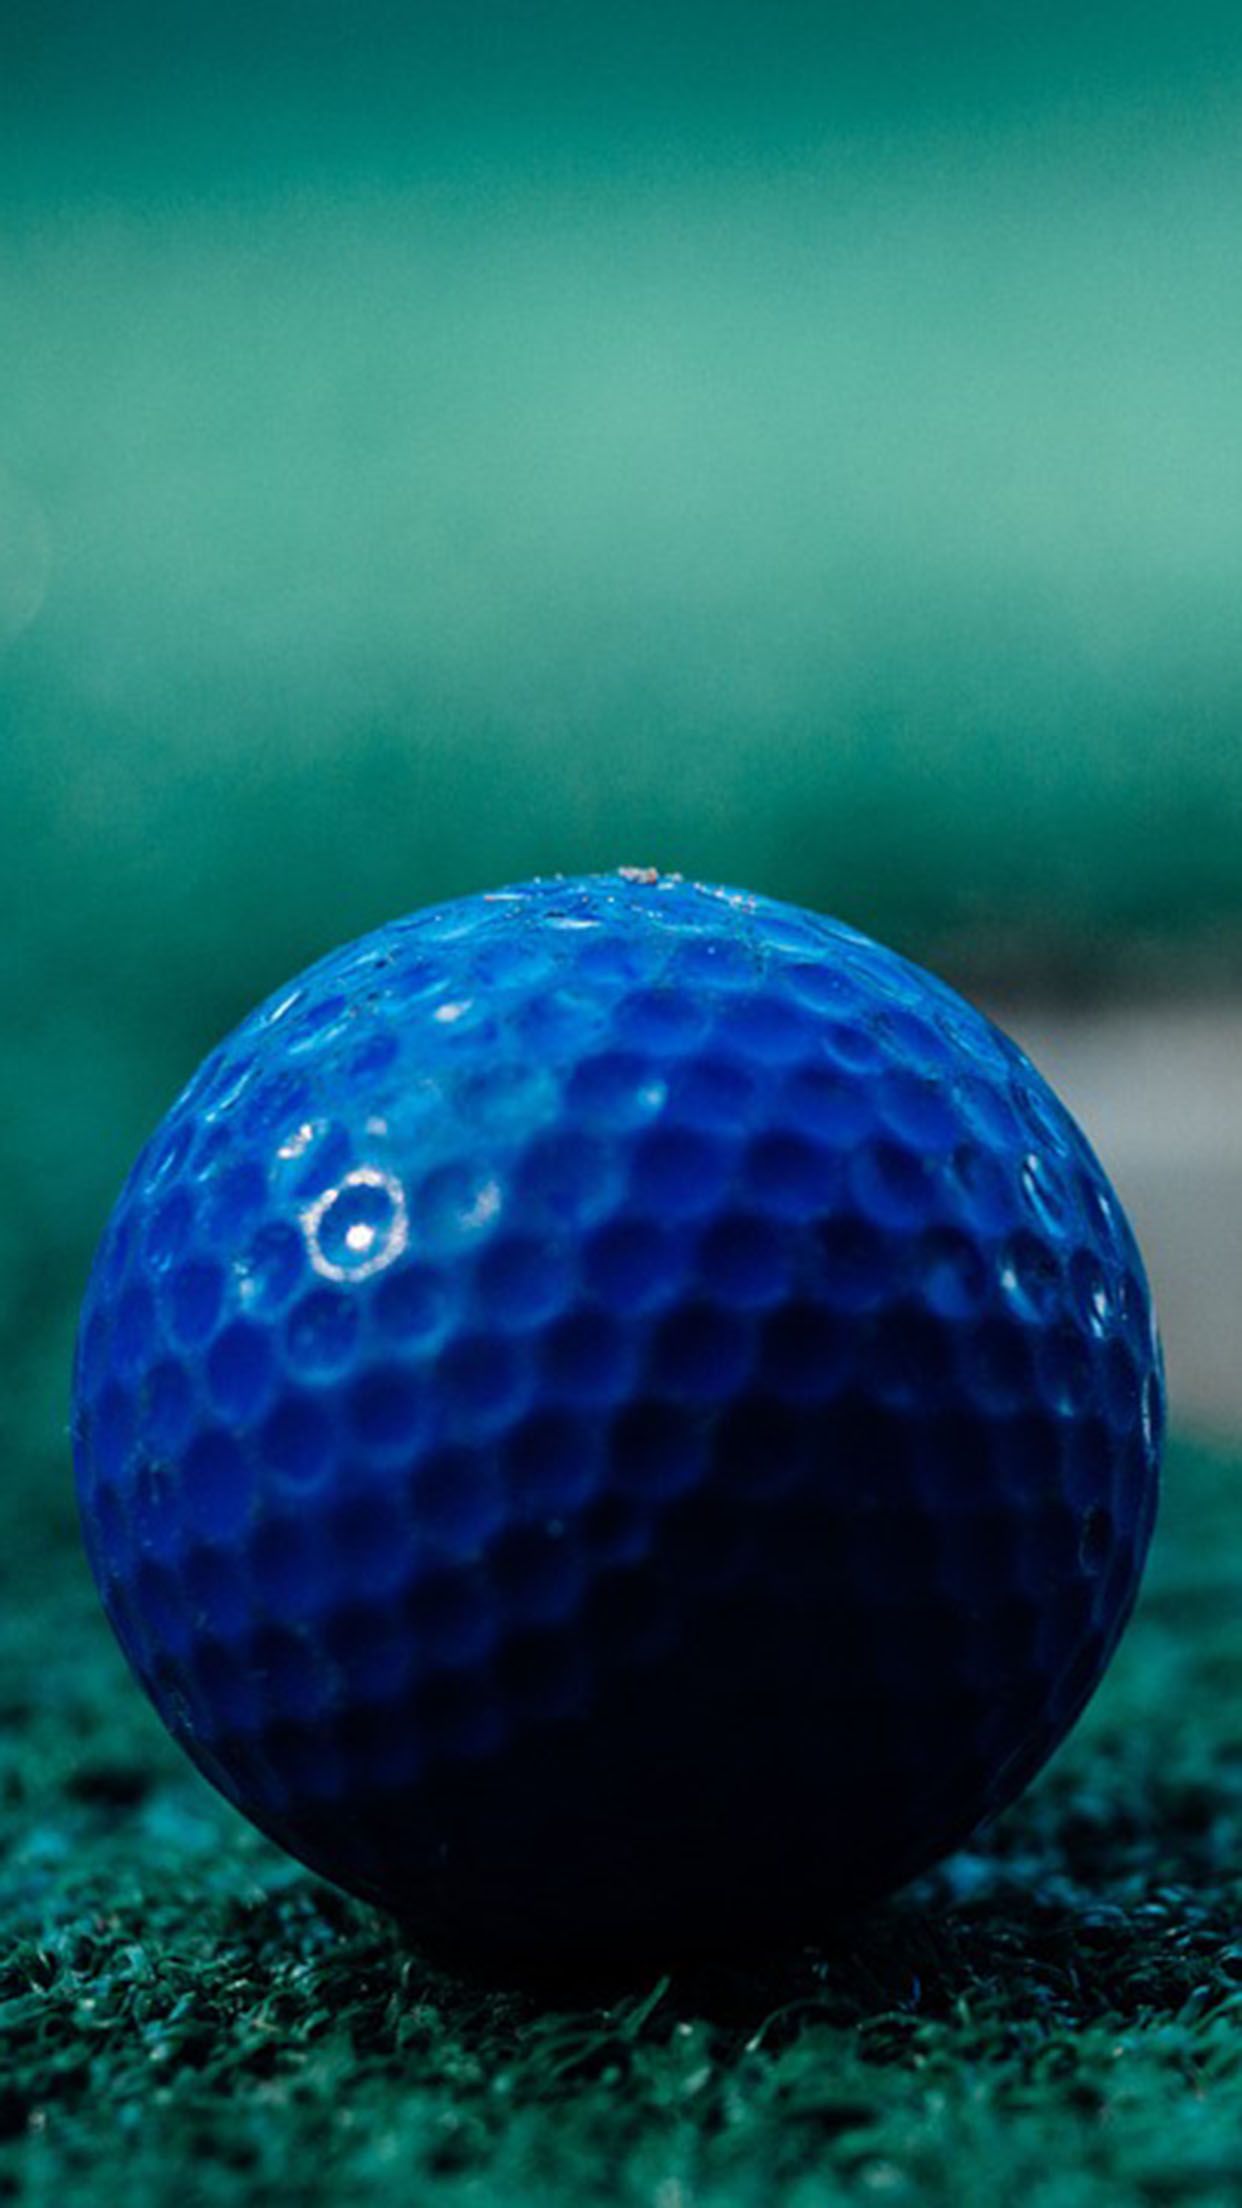 Golf ball Wallpaper for iPhone Pro Max, X, 6